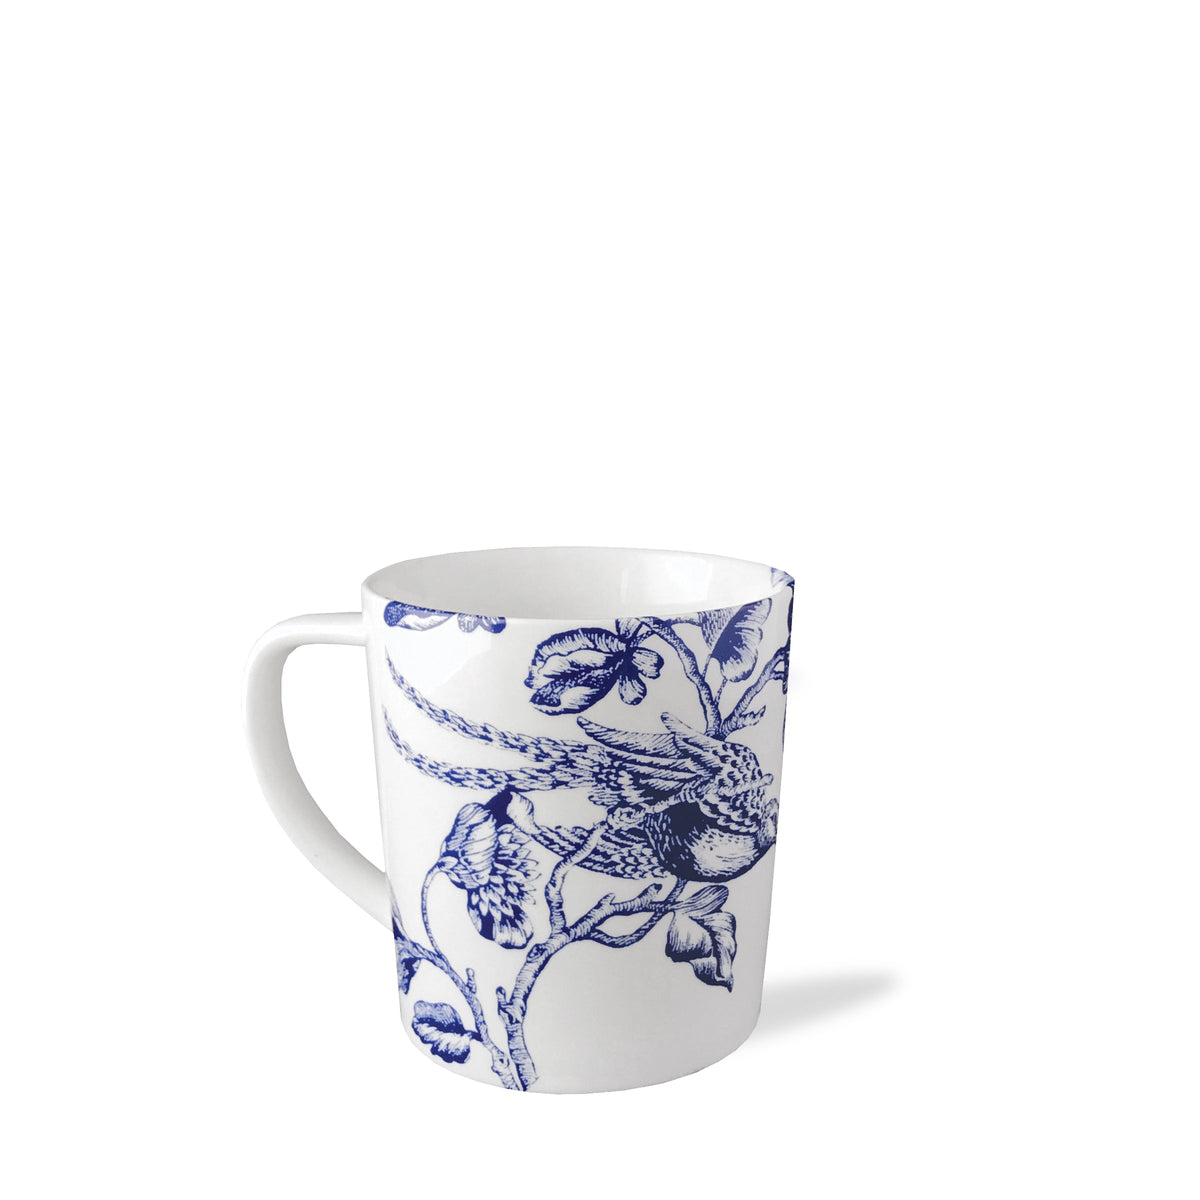 A Chinoiserie Toile Mug Blue from Caskata Artisanal Home with a bird on it.